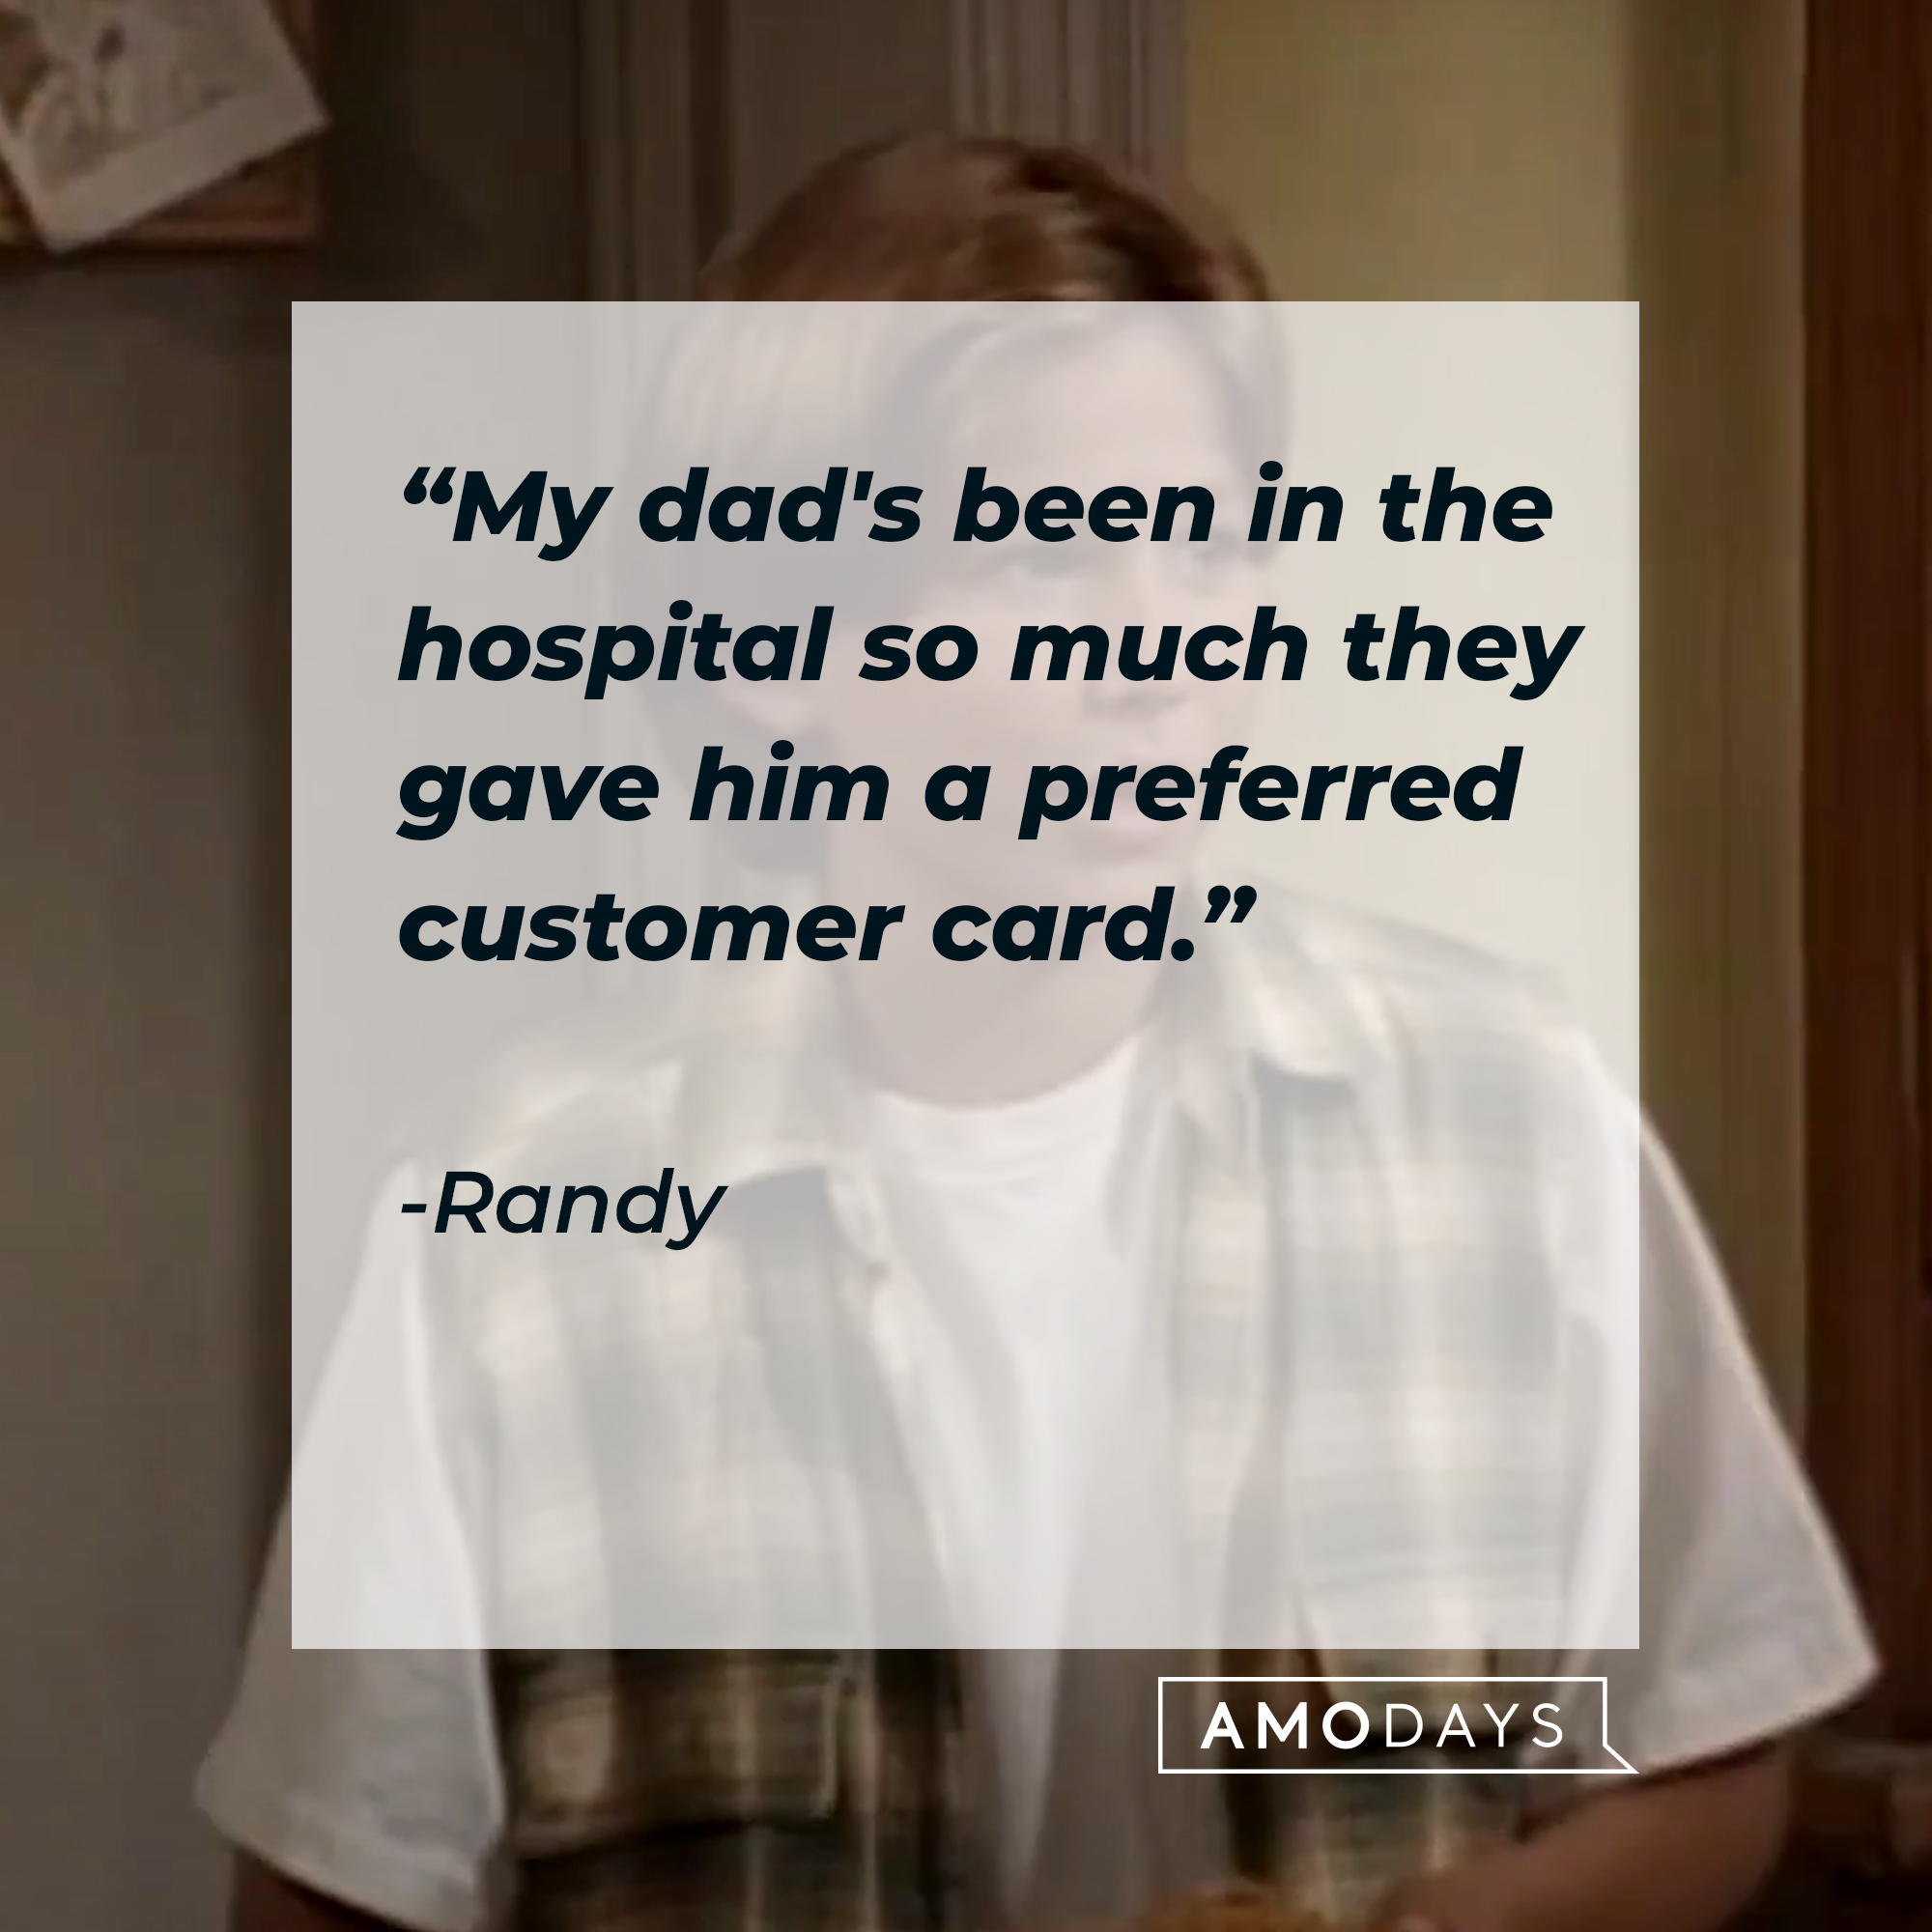 Randy's quote: “My dad's been in the hospital so much they gave him a preferred customer card.” | Source: youtube.com/ABCNetwork